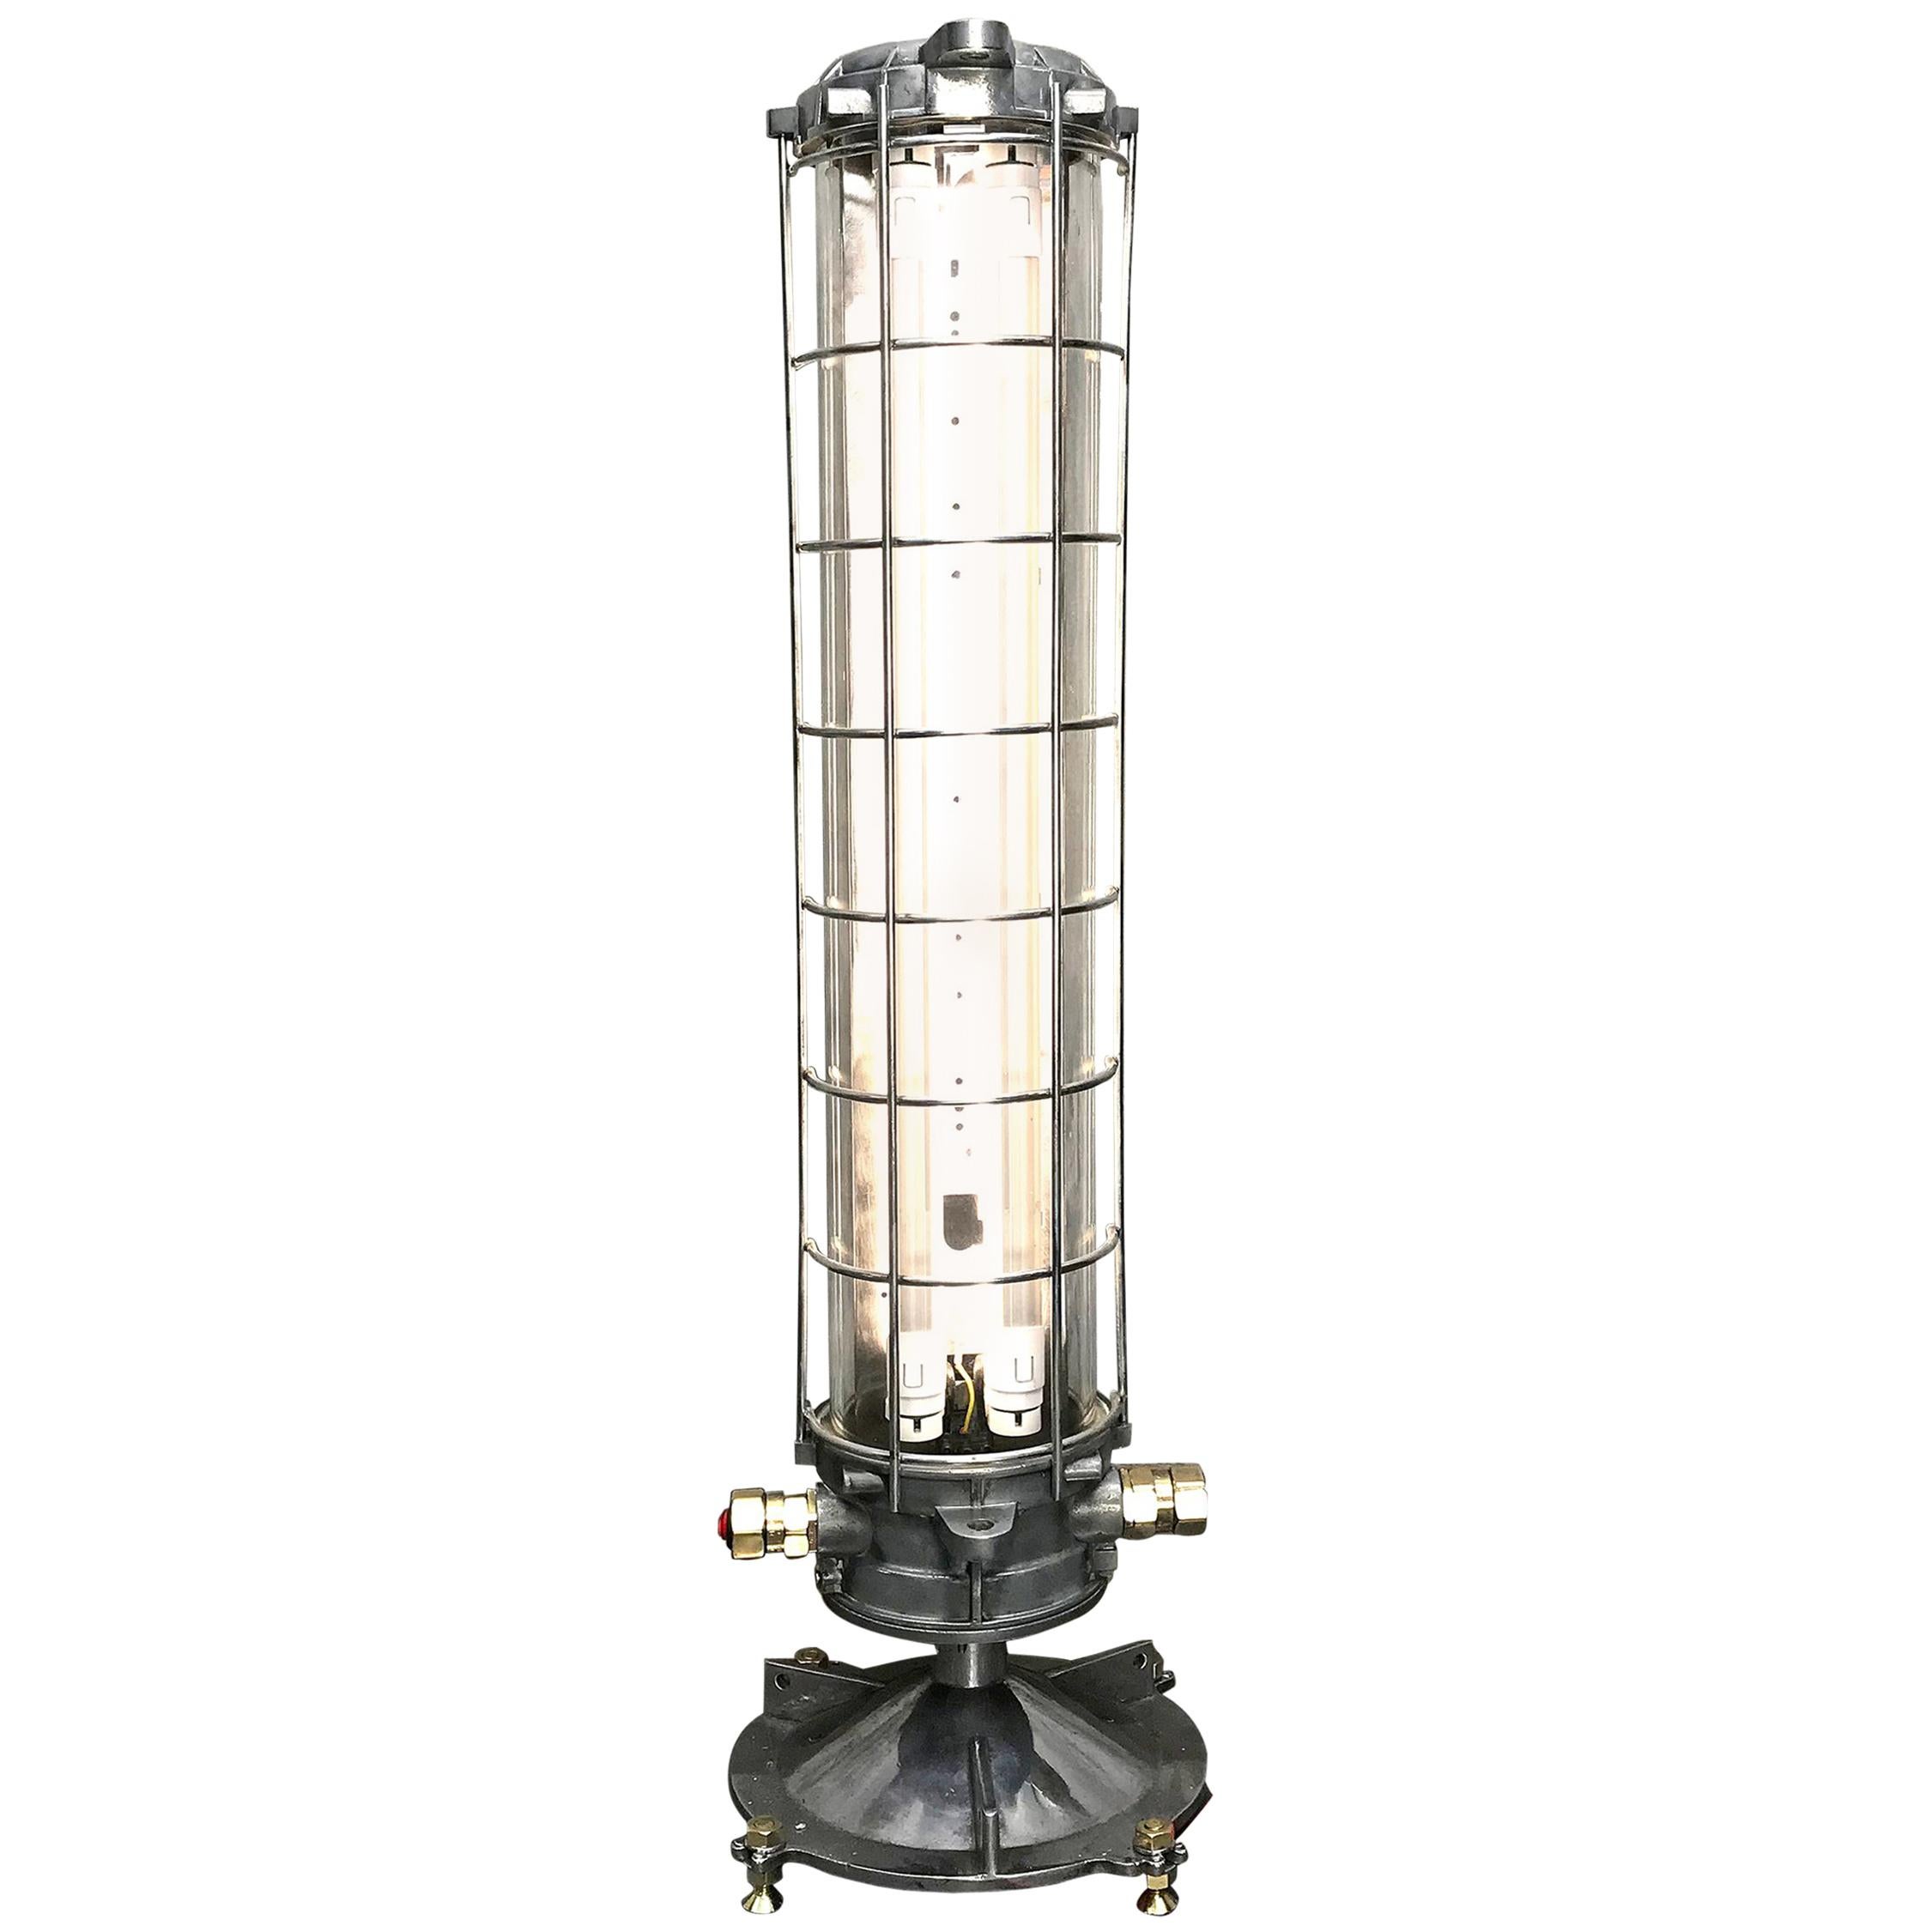 Late Century French Aluminium and Glass Explosion Proof Floor Standing Tube Lamp